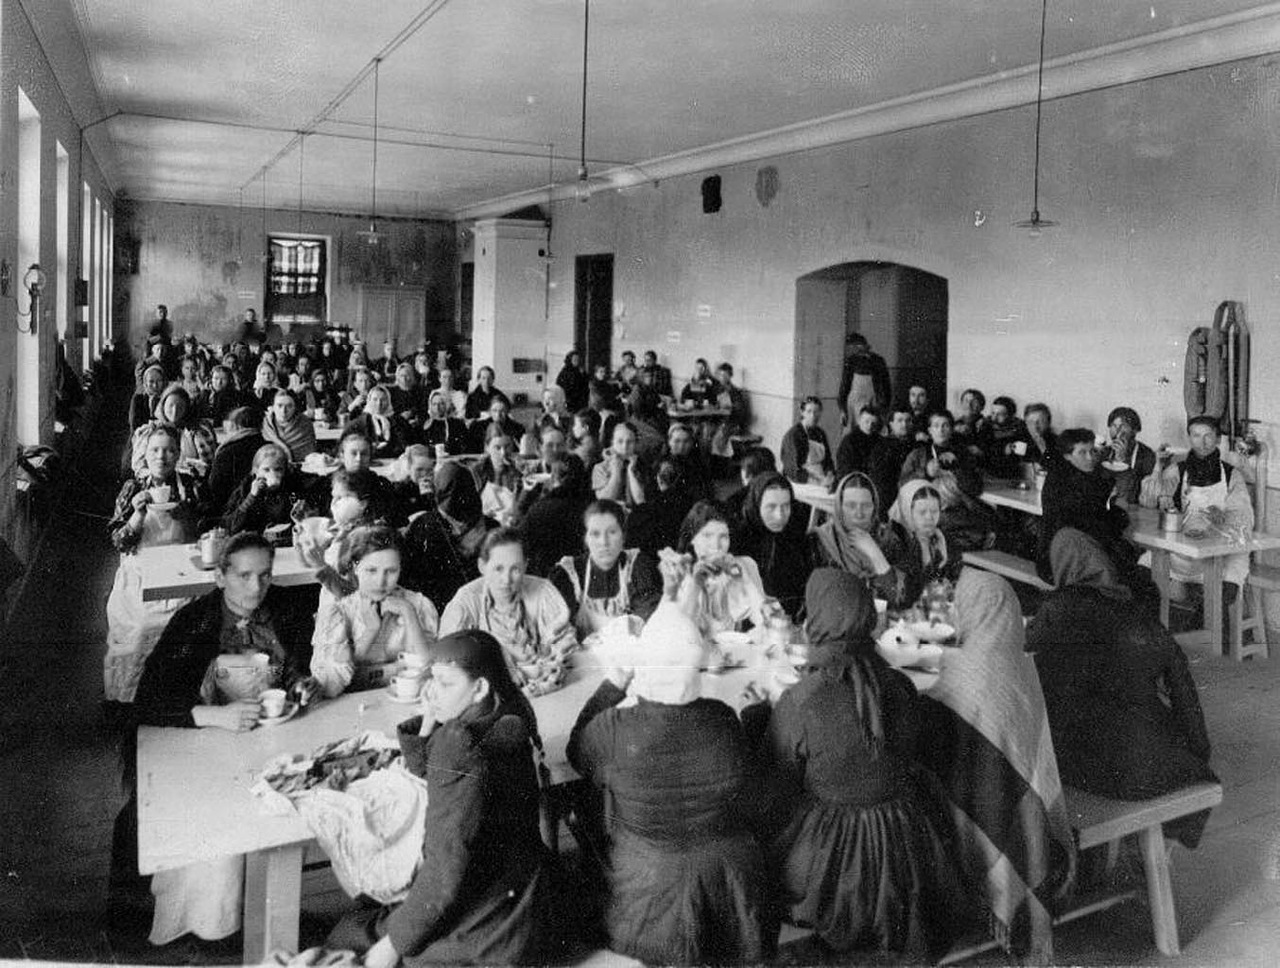 Workers waiting for lunch at the dining hall at State Wine Warehouse No. 1. Keller and K° employed about 380 people at its peak.